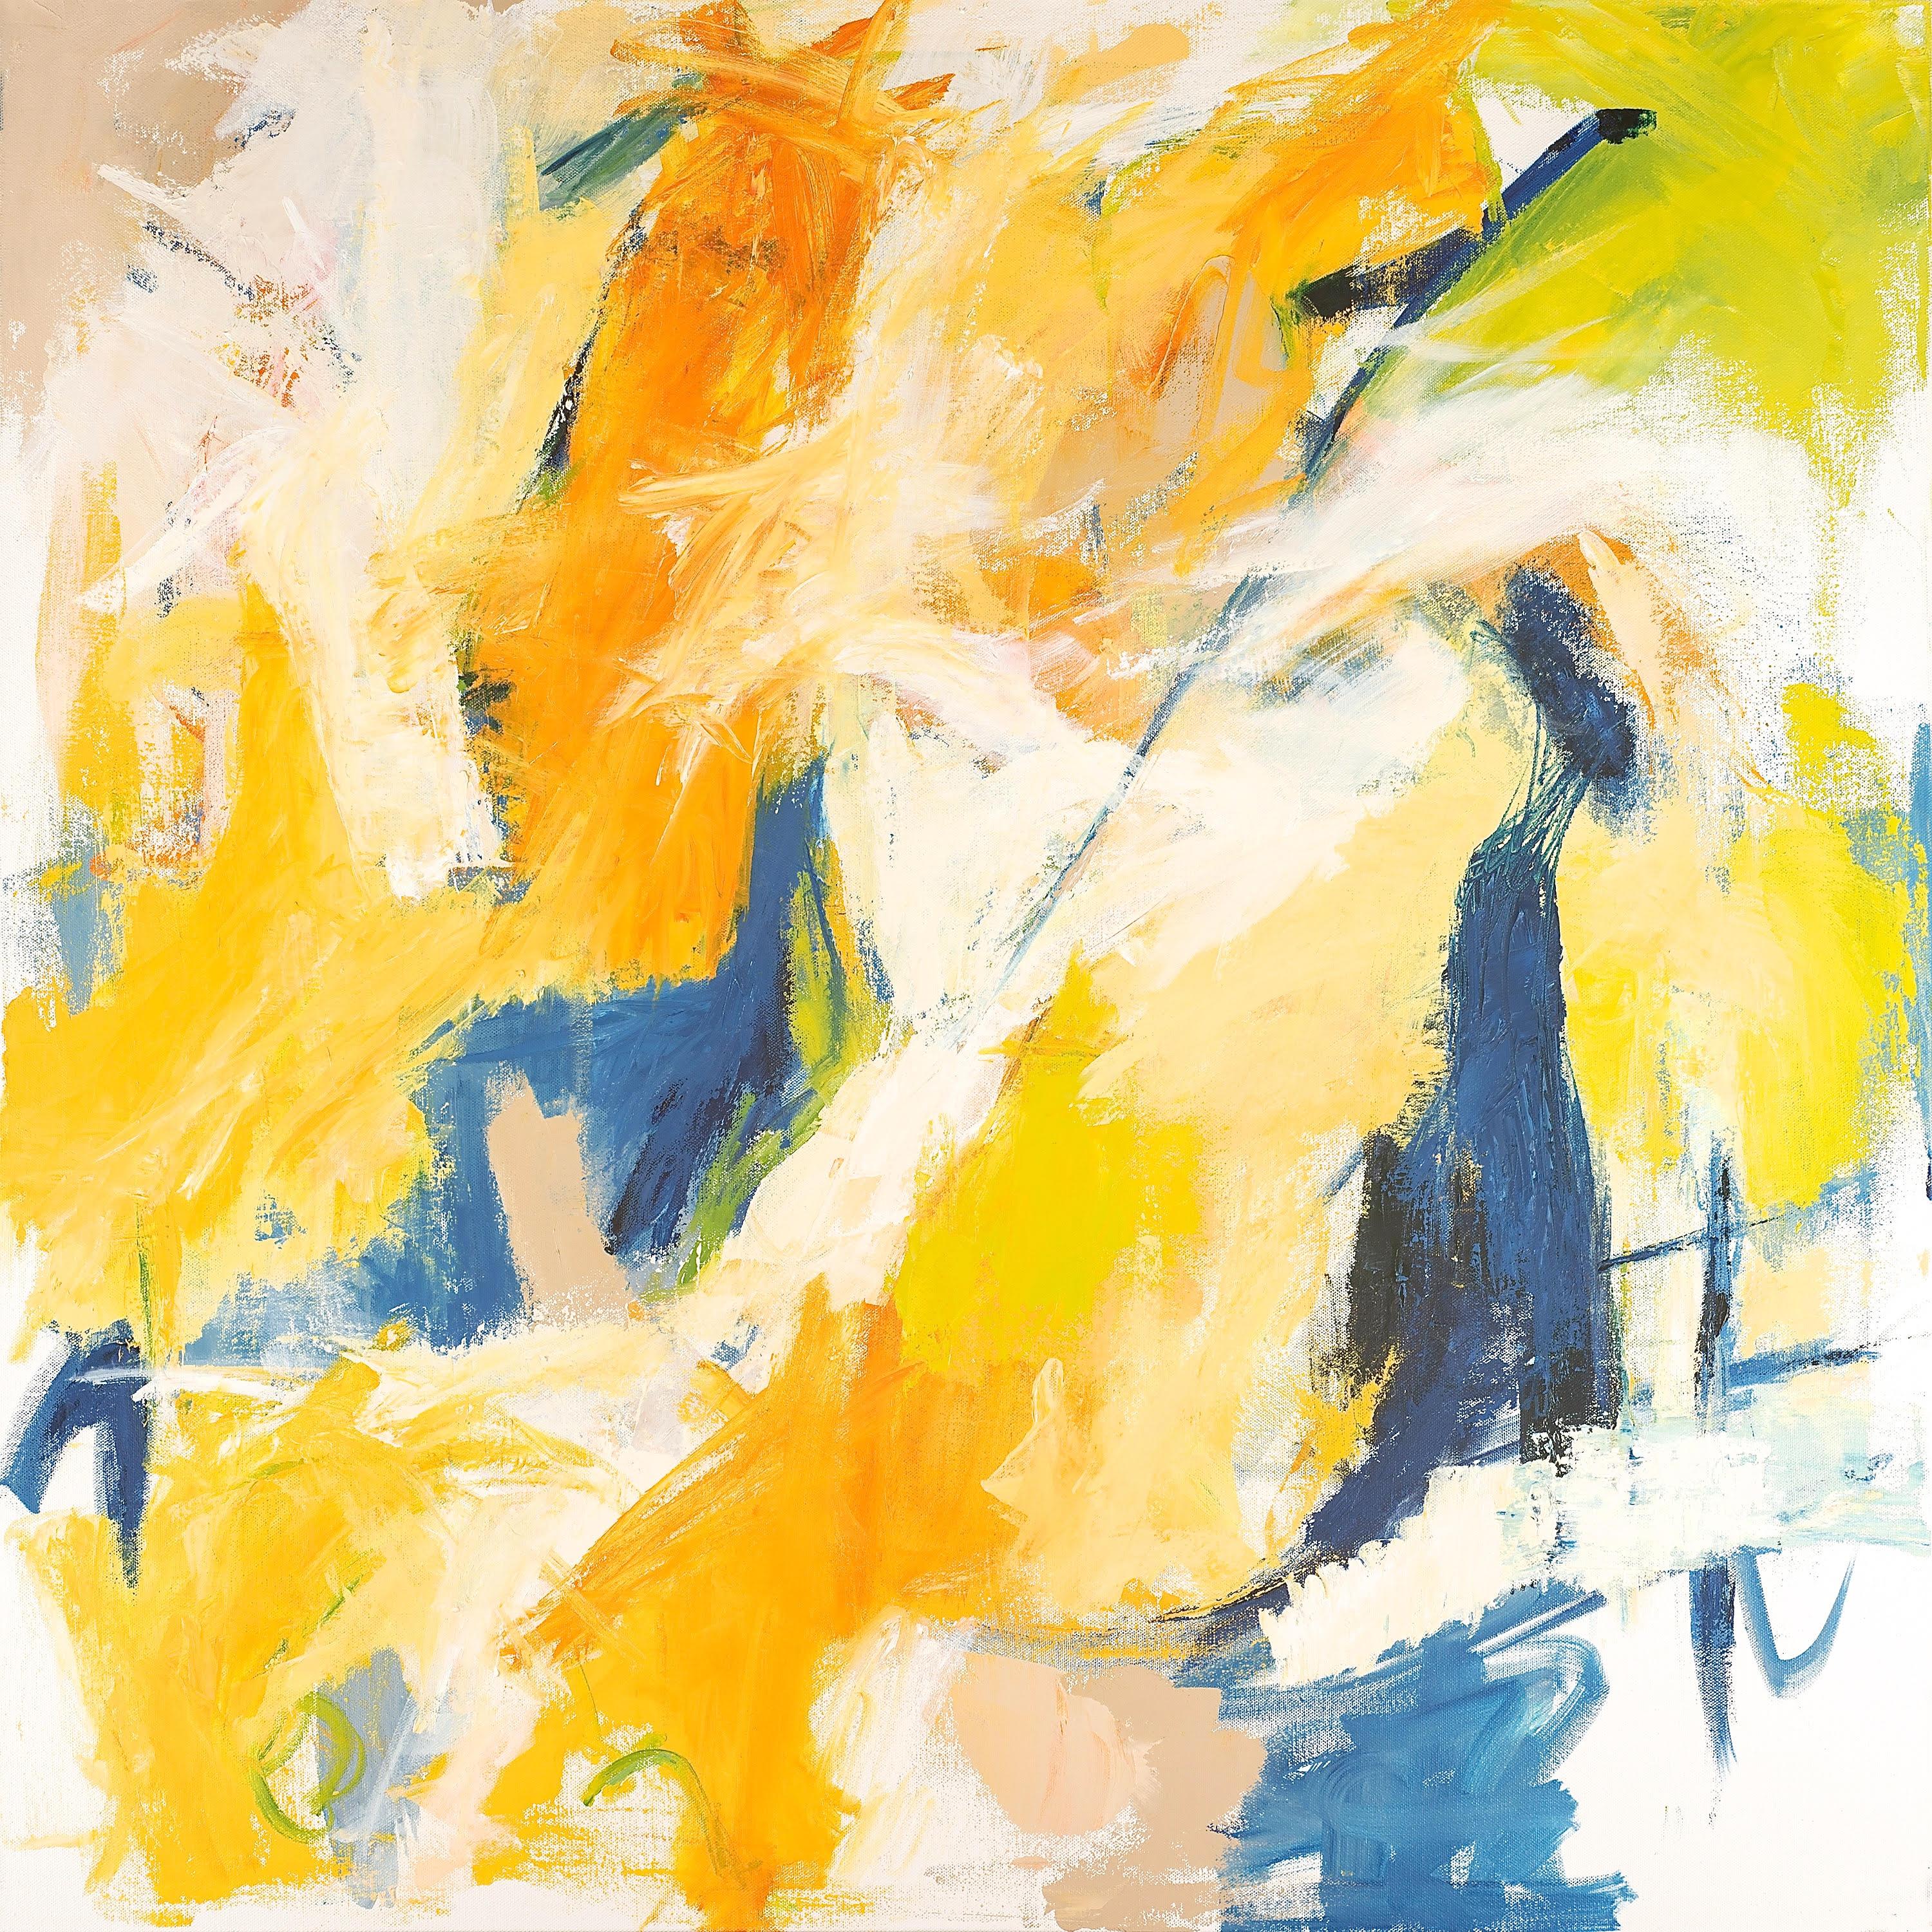 Cathy Bennigson Abstract Painting - "Peaches and Pears" Abstraction in Yellow, White, Blue, Chartreuse, Blue, Black